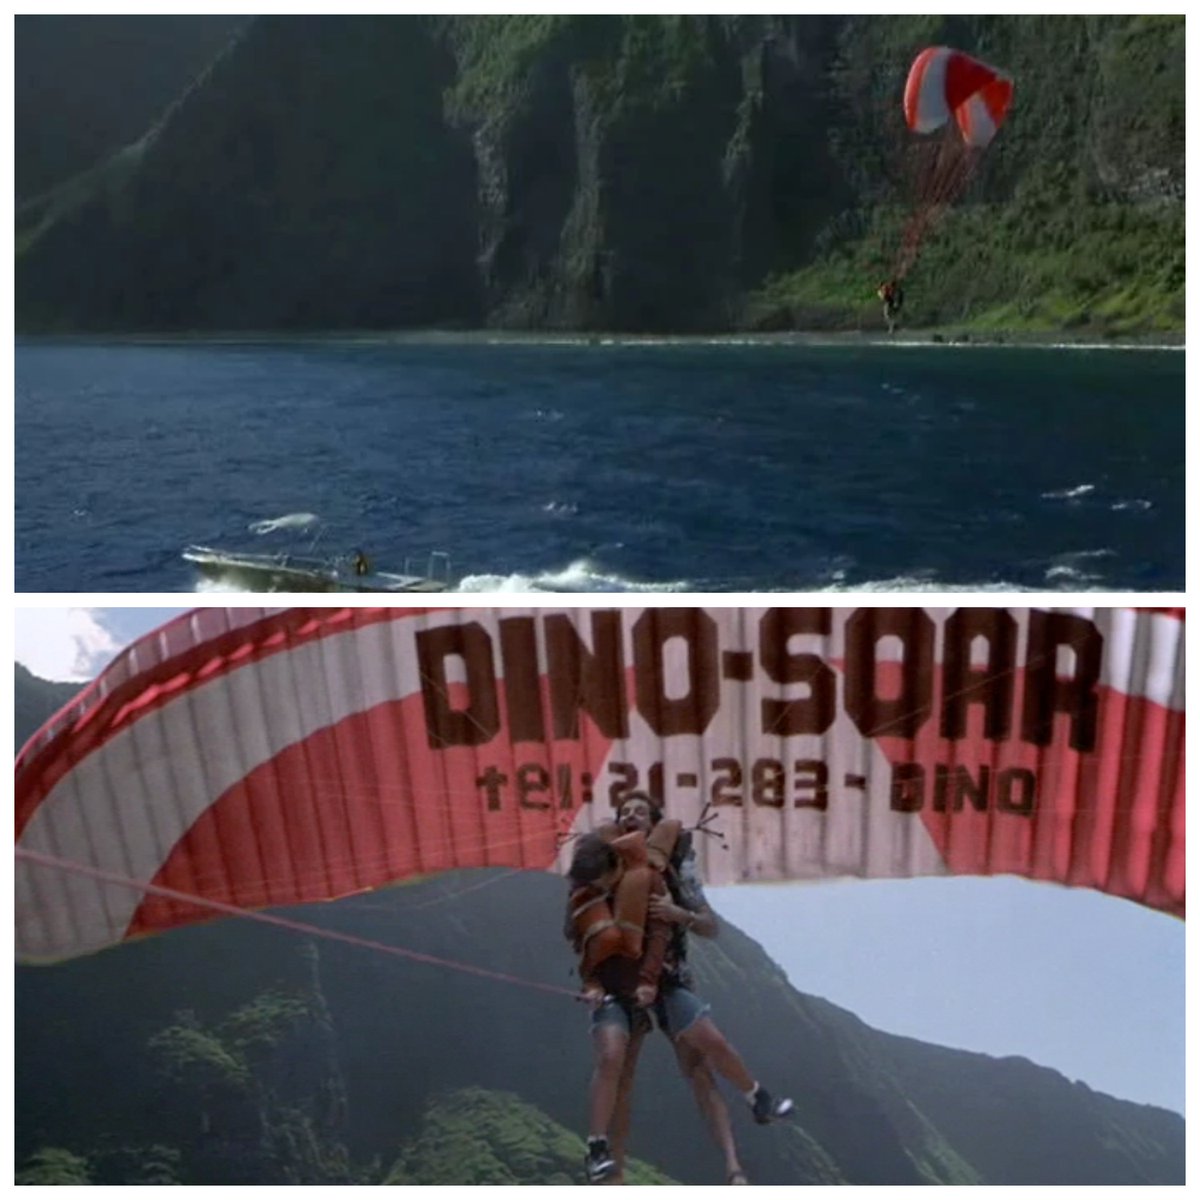 On this day in 2001, Eric Kirby and Ben Hildenrand go parasailing on Isla Sorna. It does not end well. - Jamie